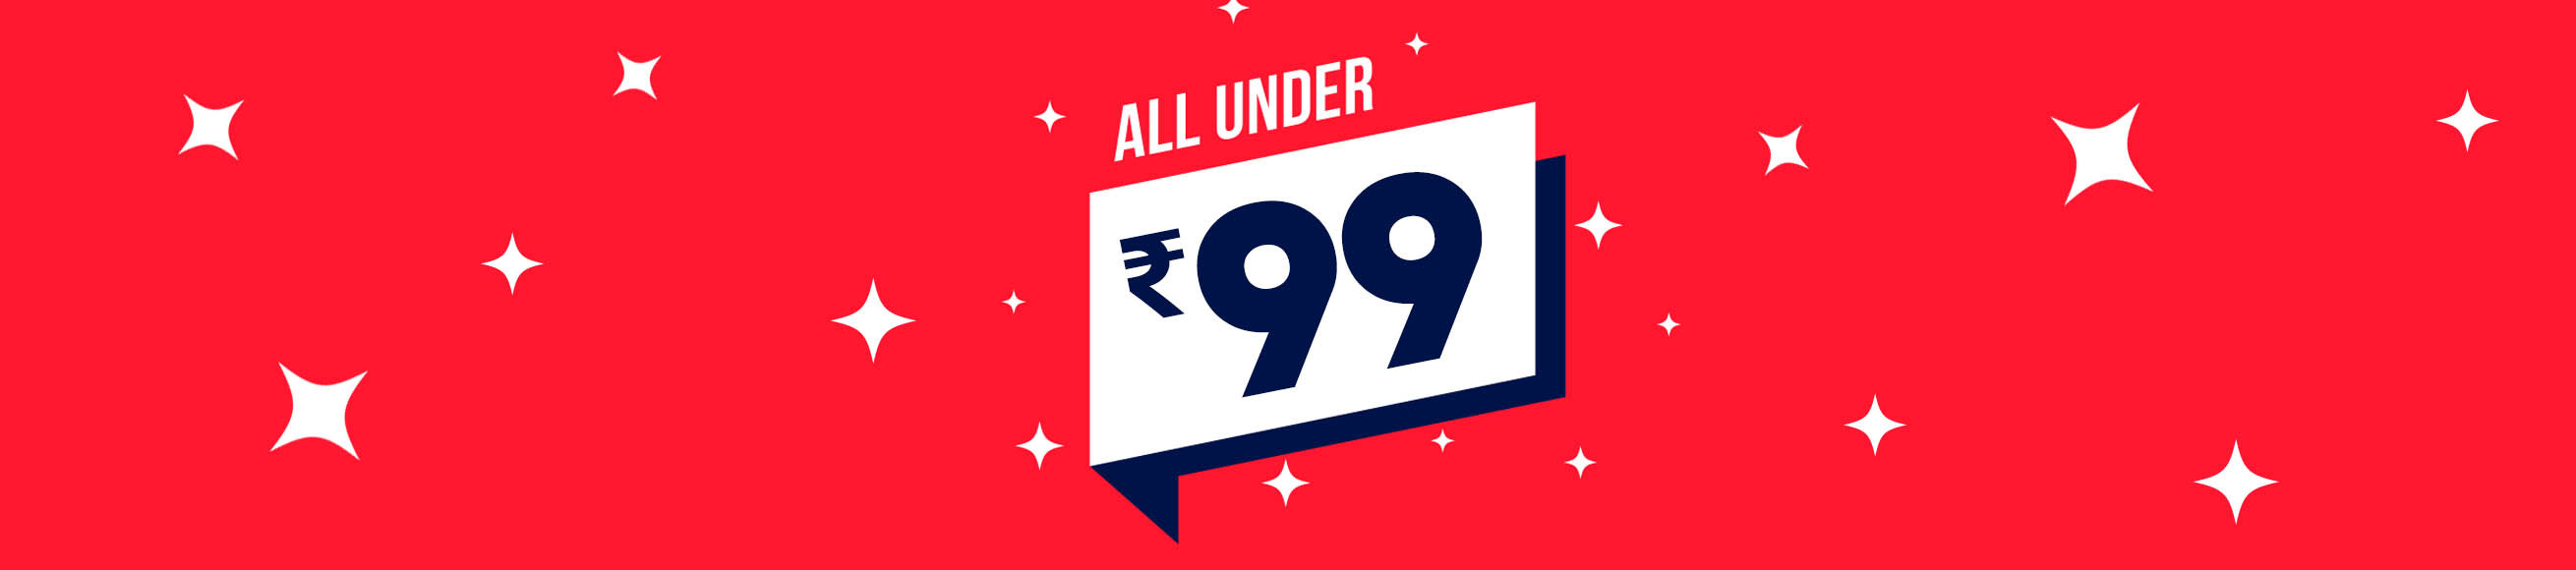 Deals Under Rs.99 Only